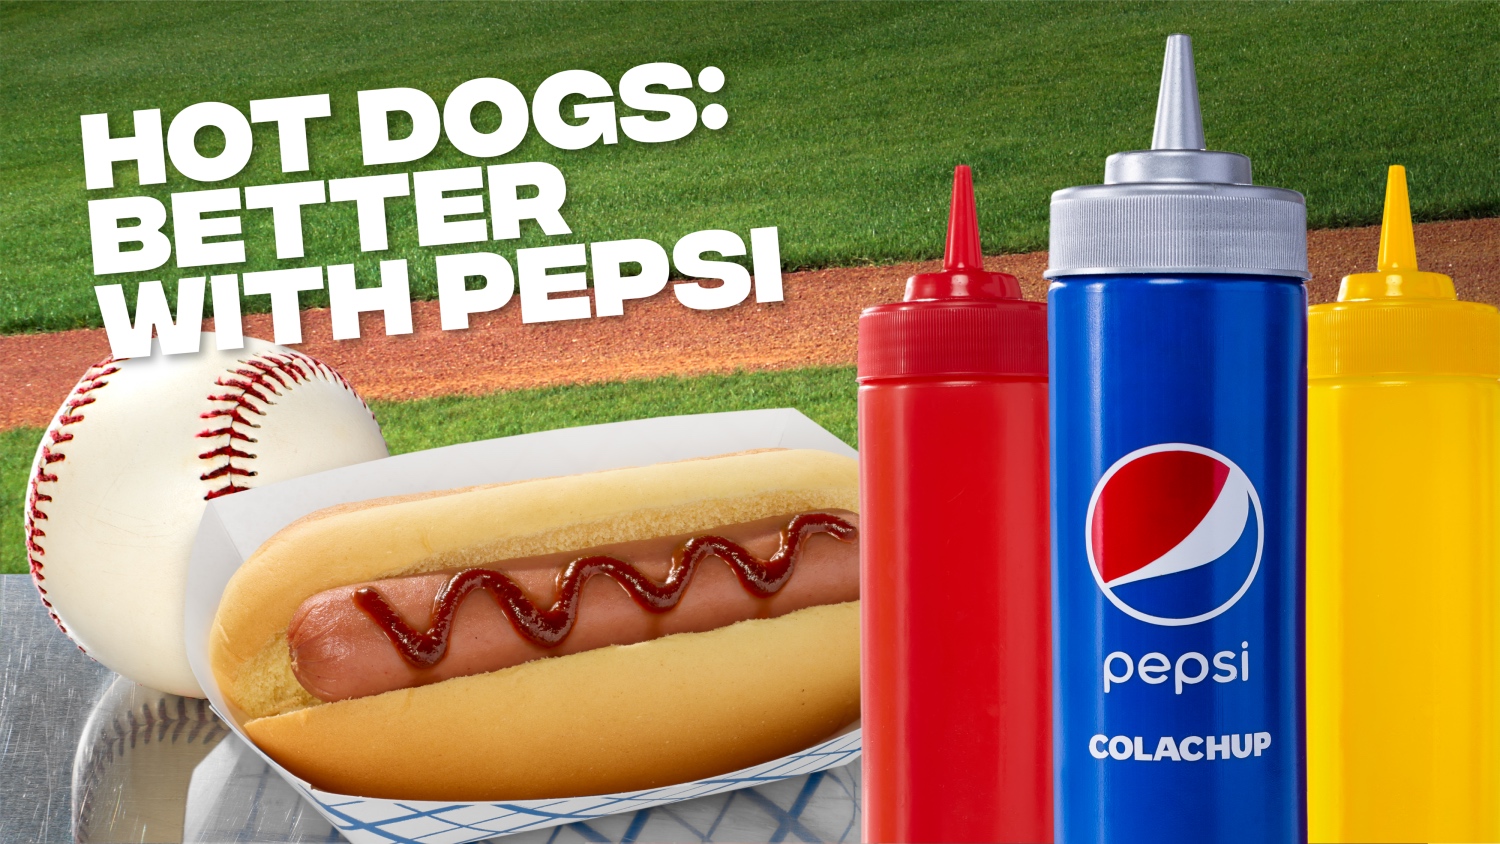 Pepsi Colachup condiment for hot dogs